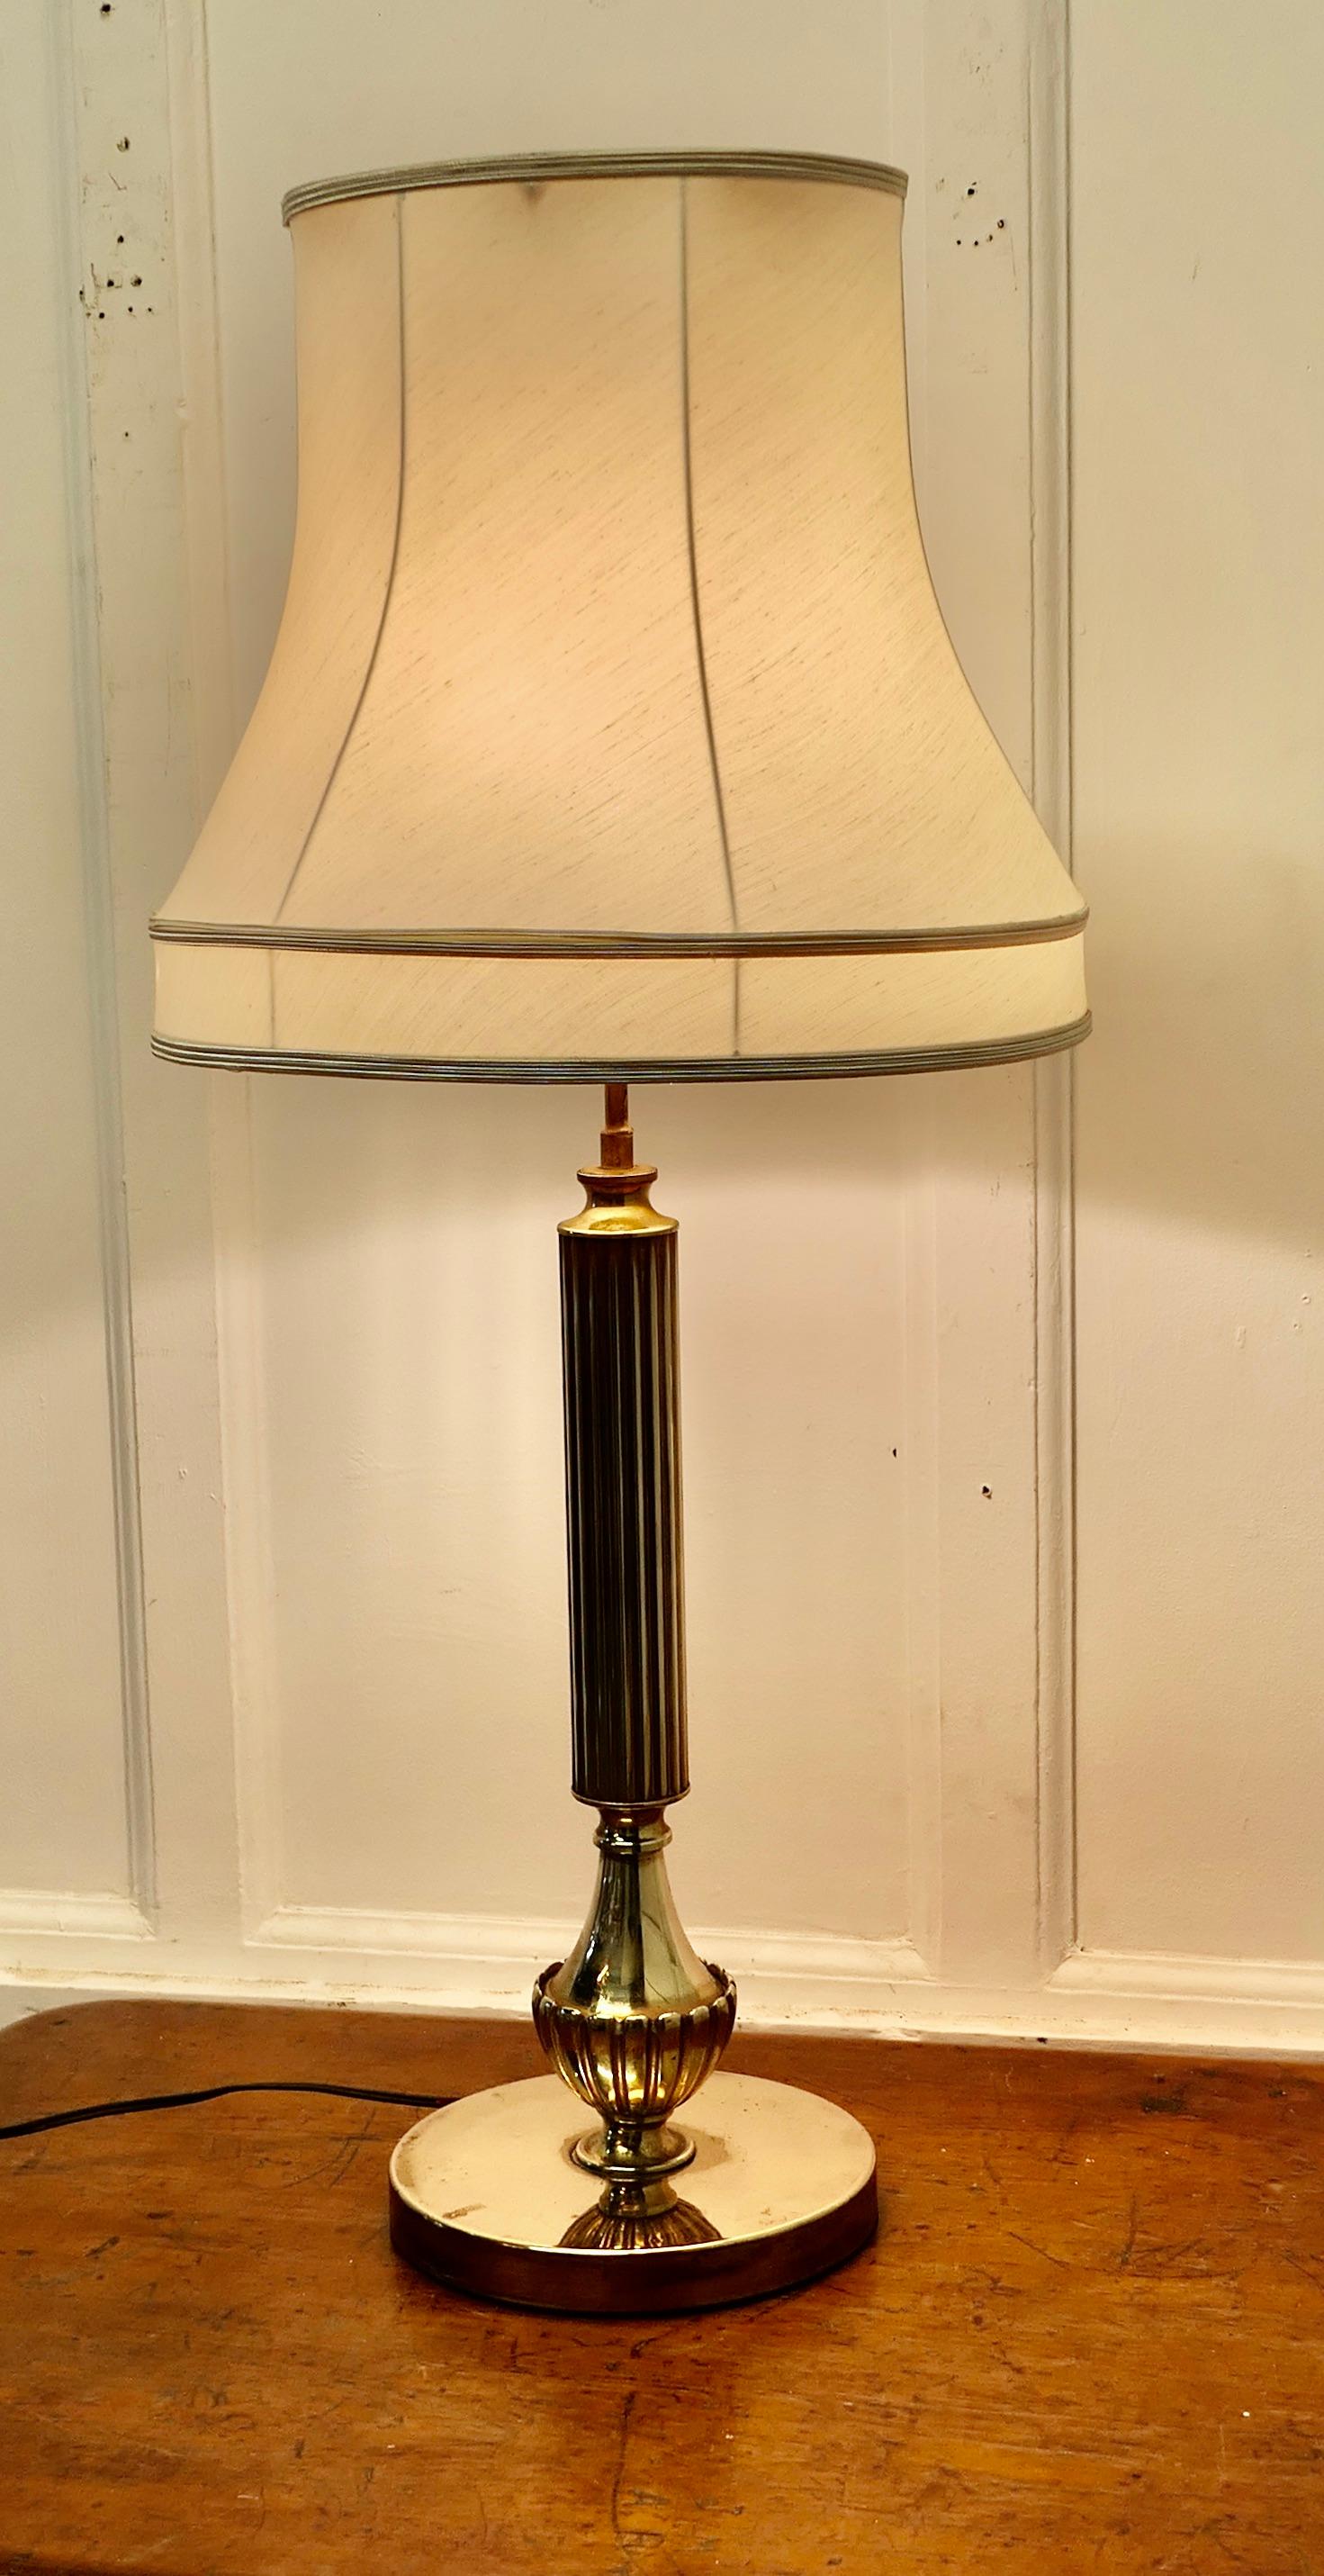 Central Brass Column Table Lamp In Good Condition For Sale In Chillerton, Isle of Wight